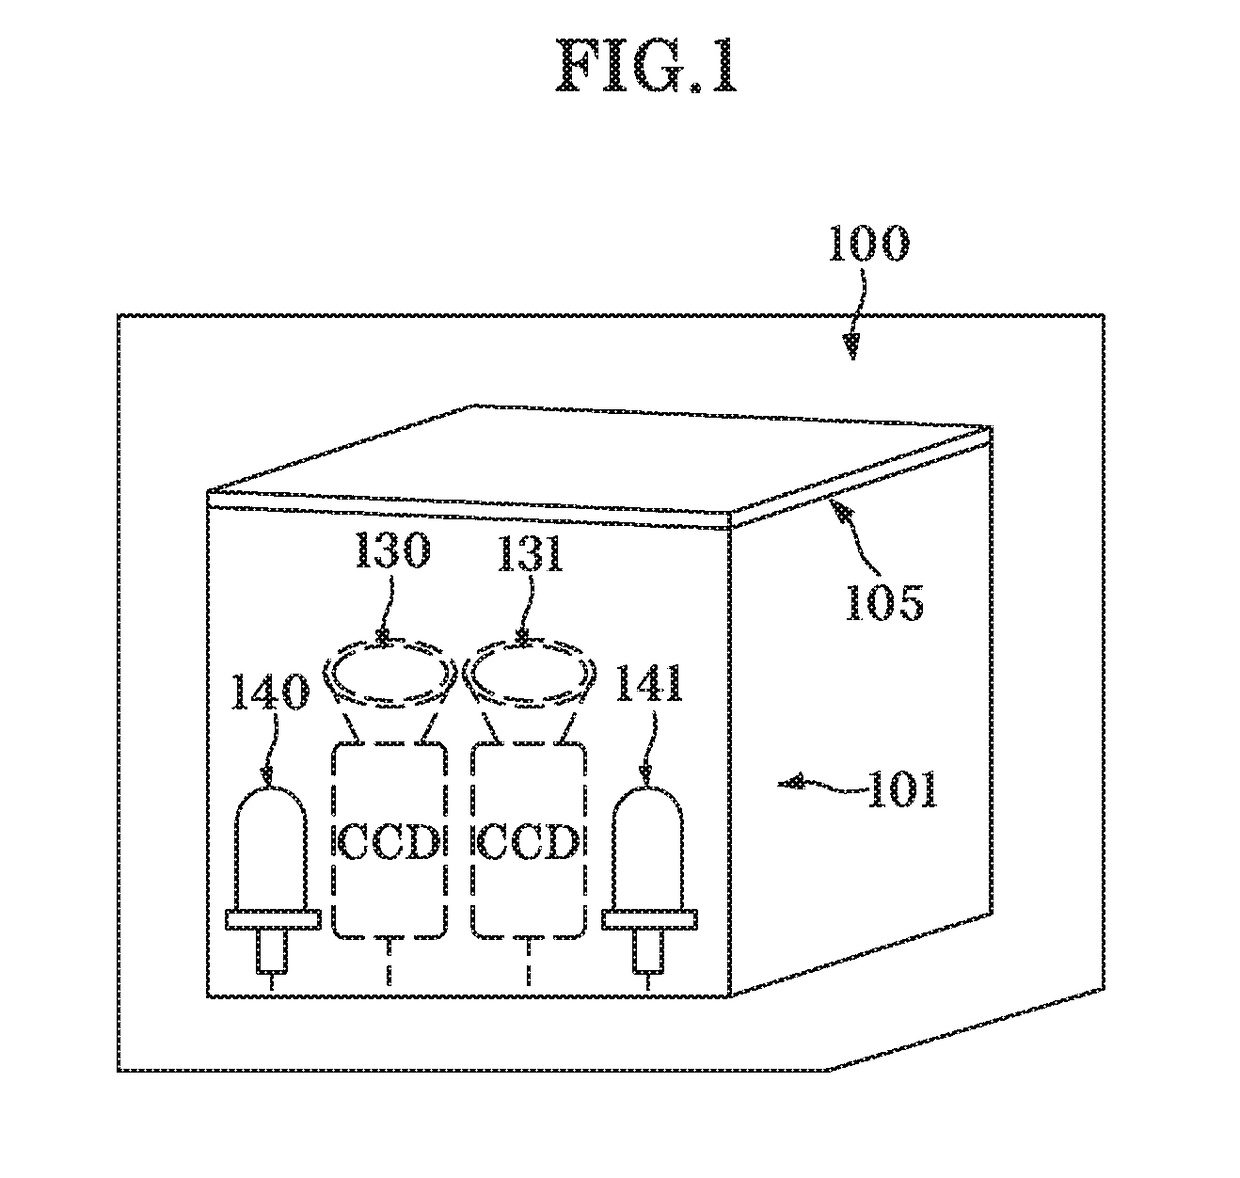 Polyhedral three-dimensional imaging device for simultaneously authenticating fingerprint and finger veins